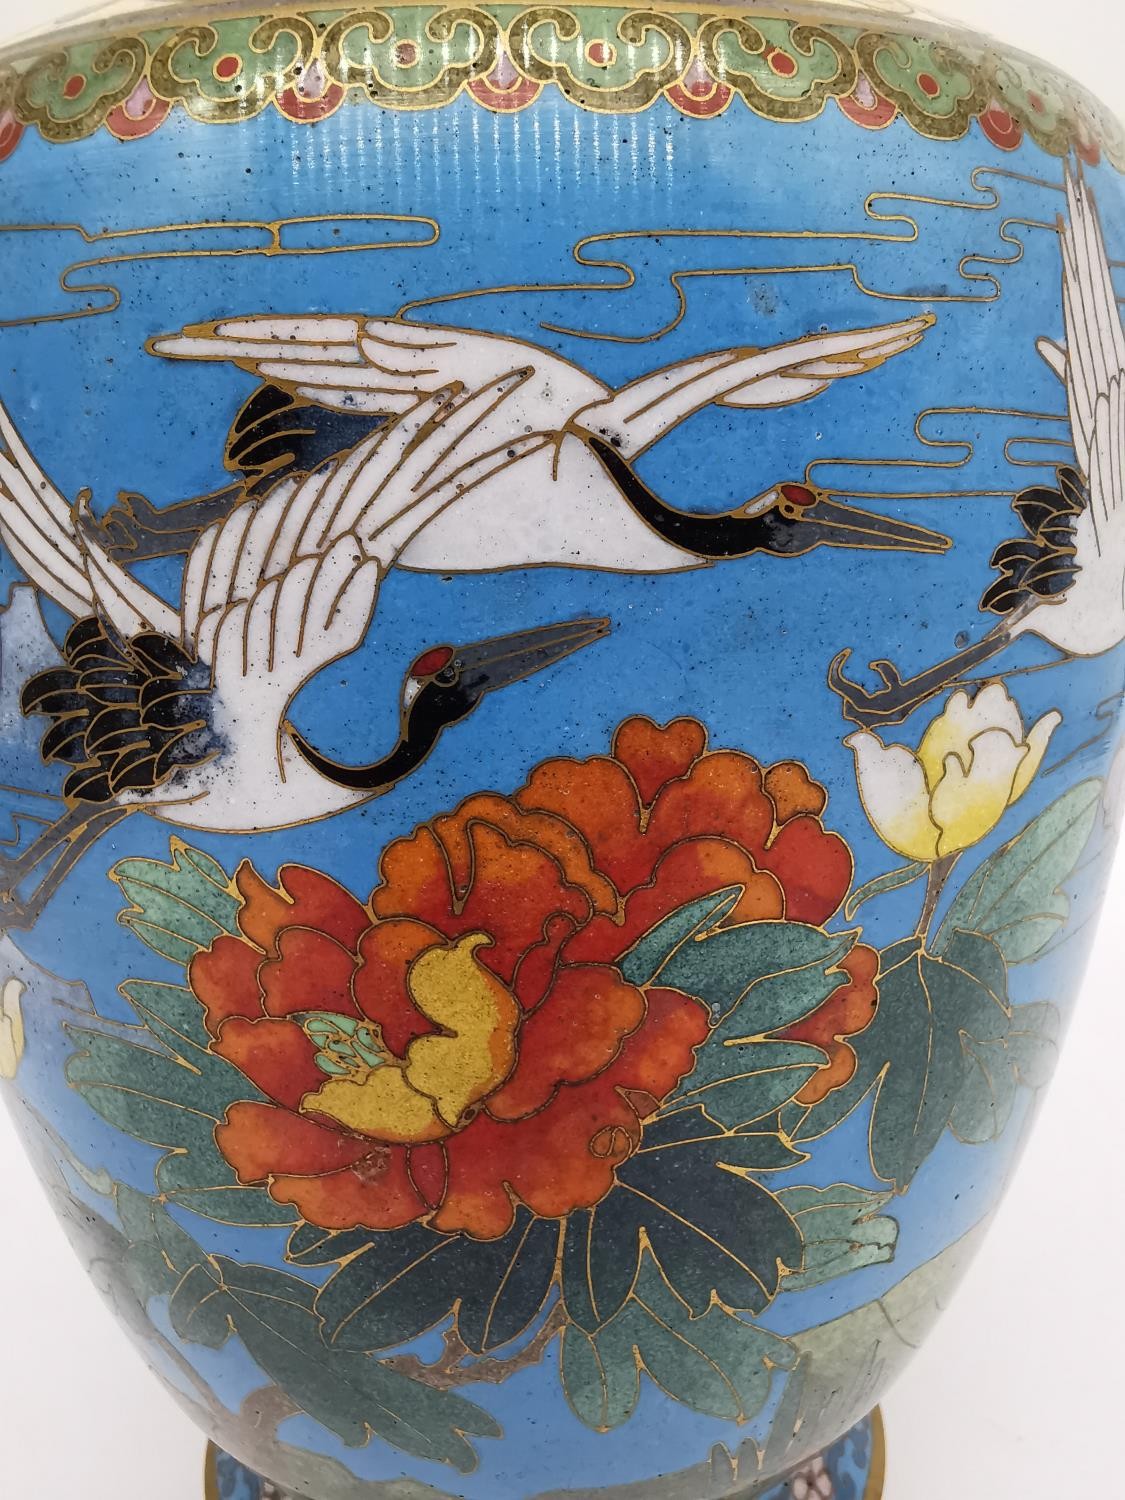 An early 20th century Chinese cloisonné enamel gilt bronze vase with crane, peony and cherry blossom - Image 4 of 9